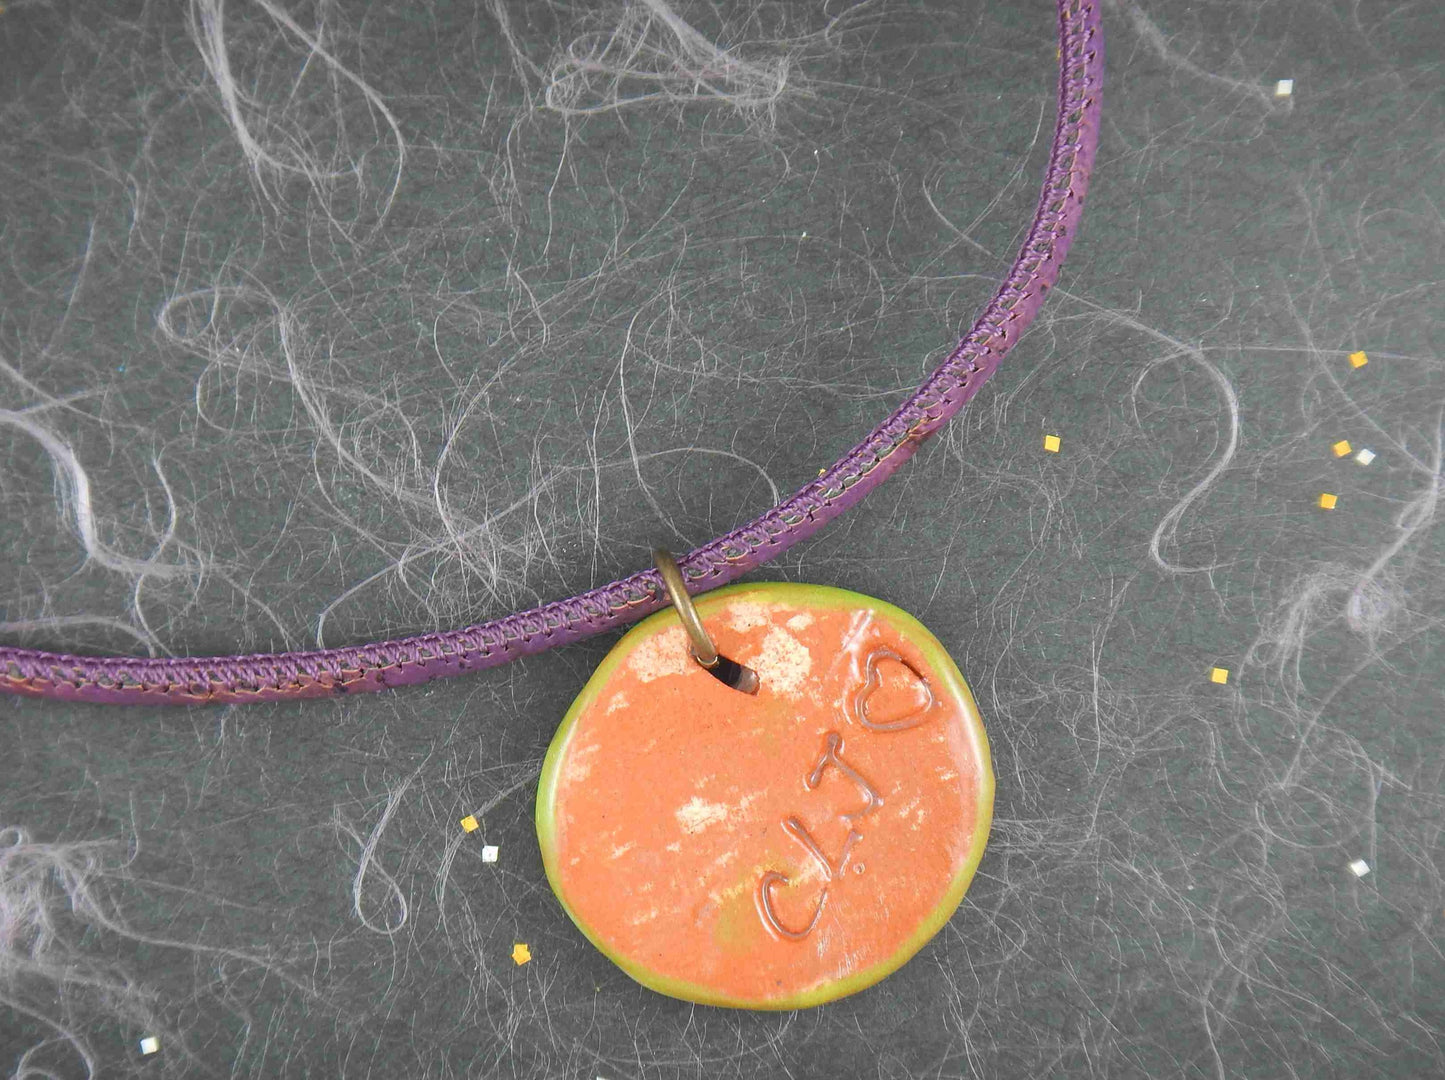 18-inch necklace with white-green-violet terracotta ceramic medallion pendant handmade in Montreal, flower pattern, violet cork cord, aluminum ring, stainless steel clasp